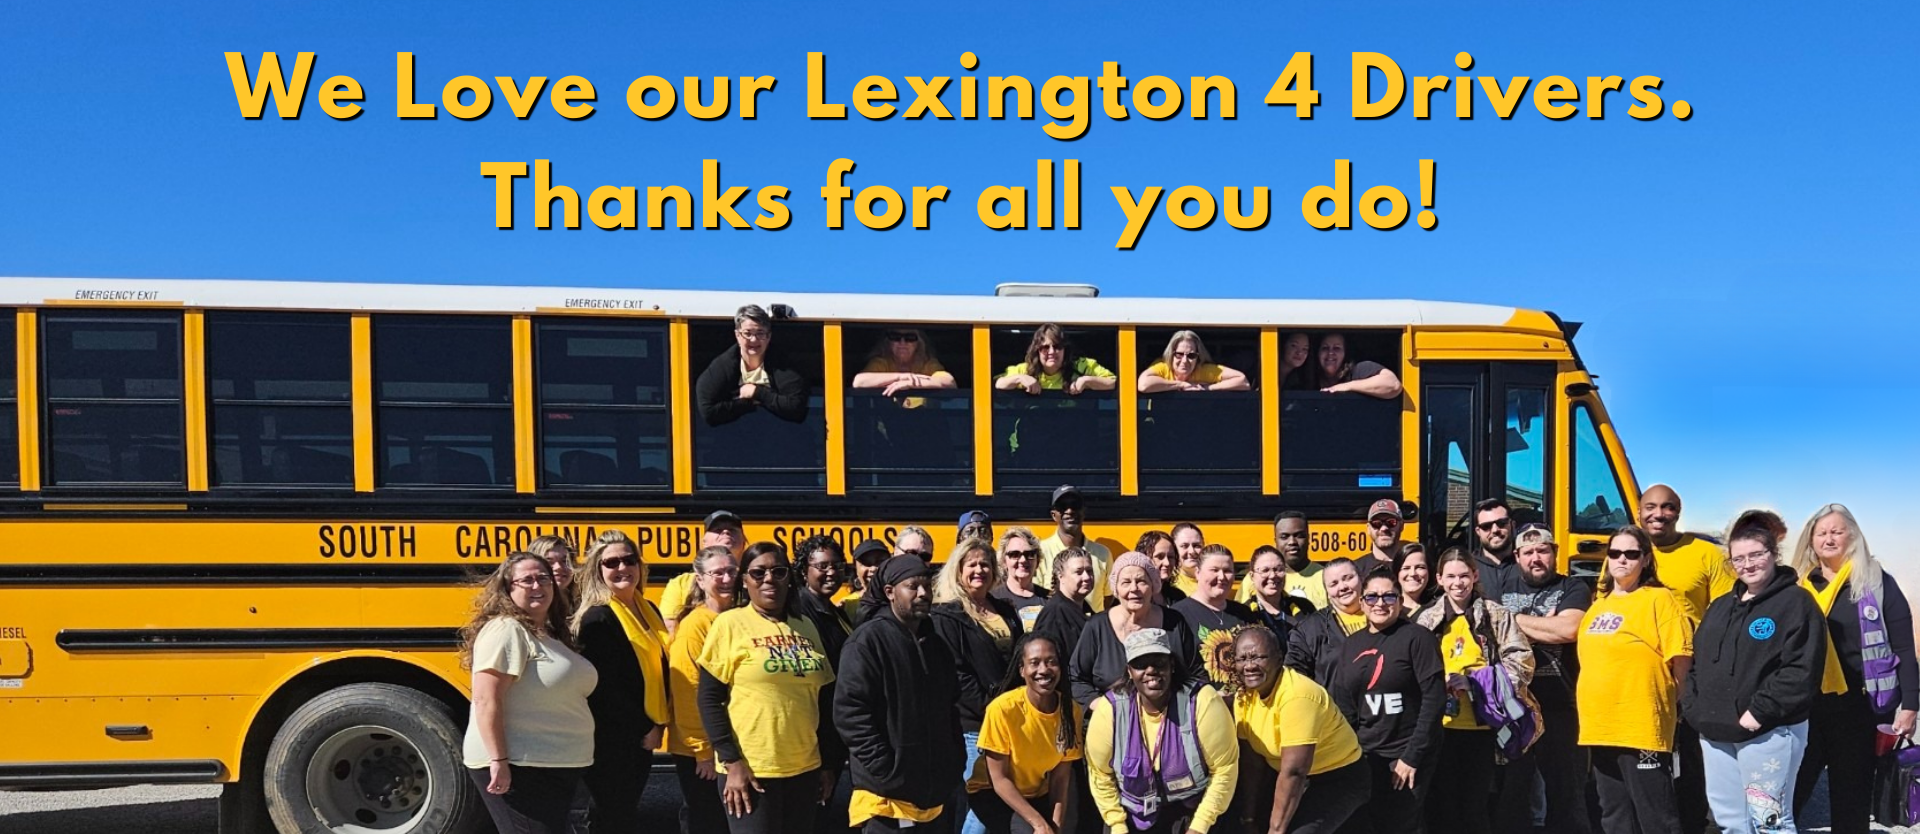 We love our Lexington 4 Drivers!  Thank you for all you do!